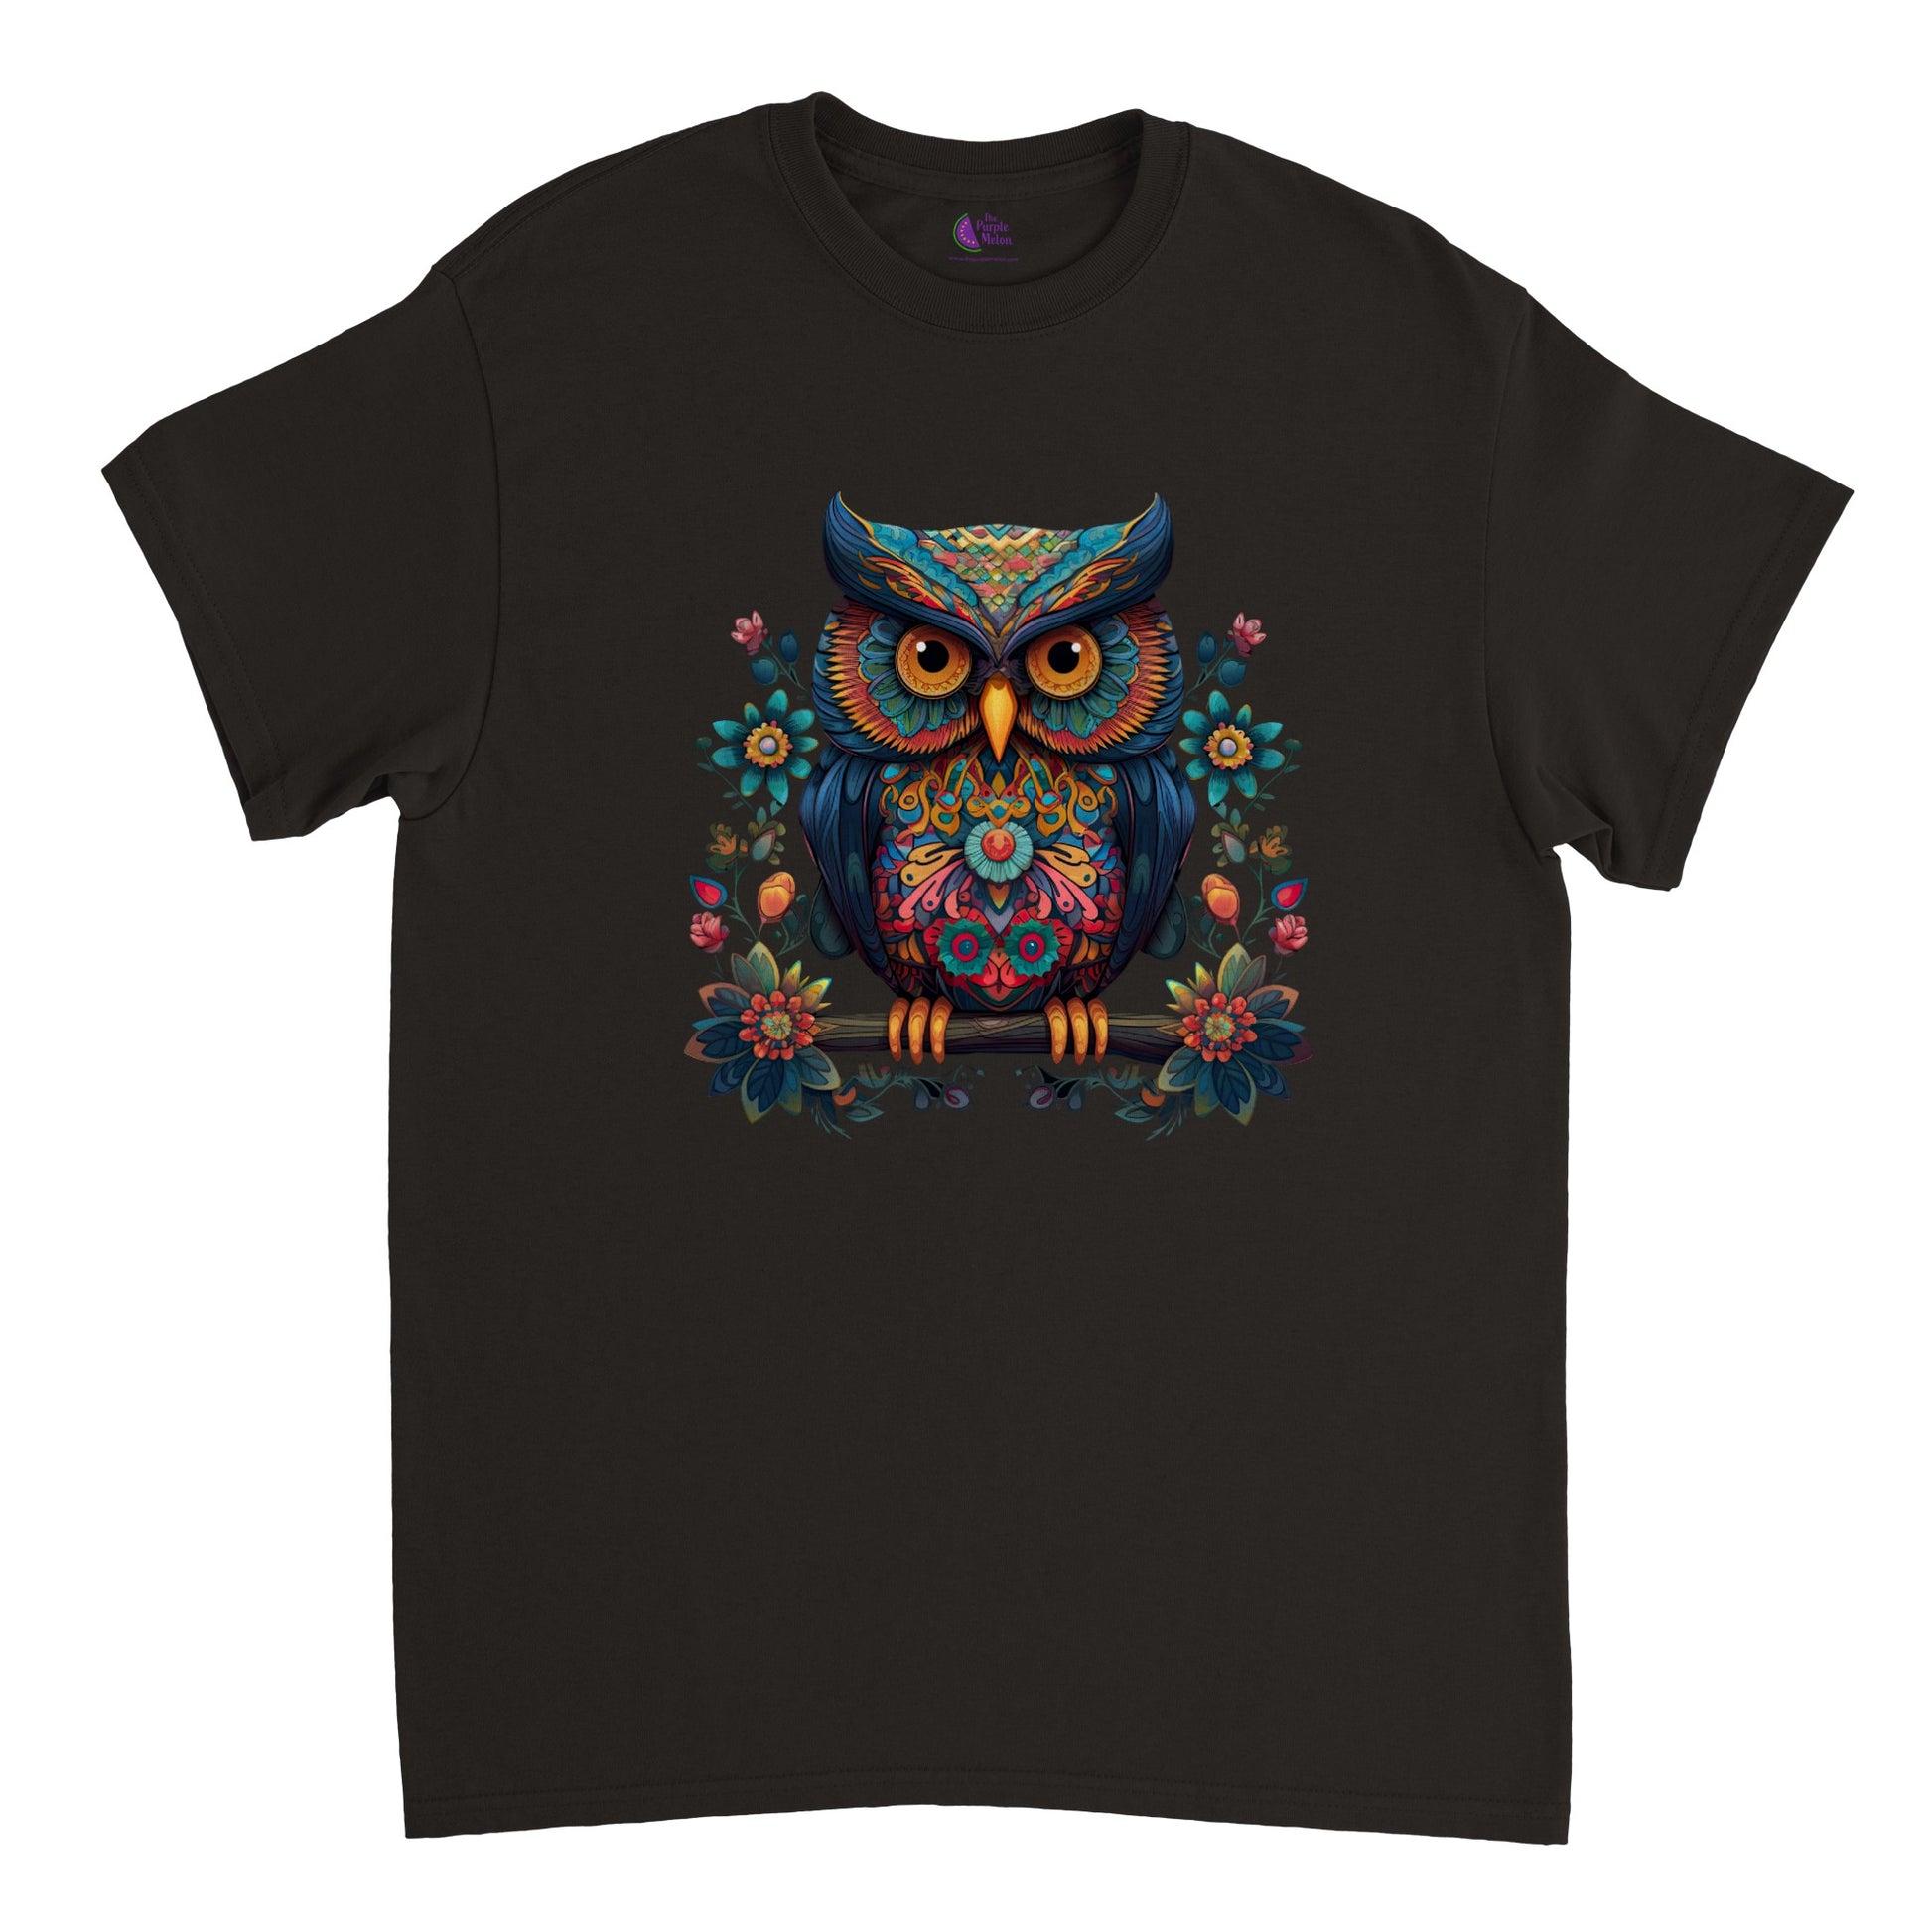 black t-shirt with a colorful floral owl print